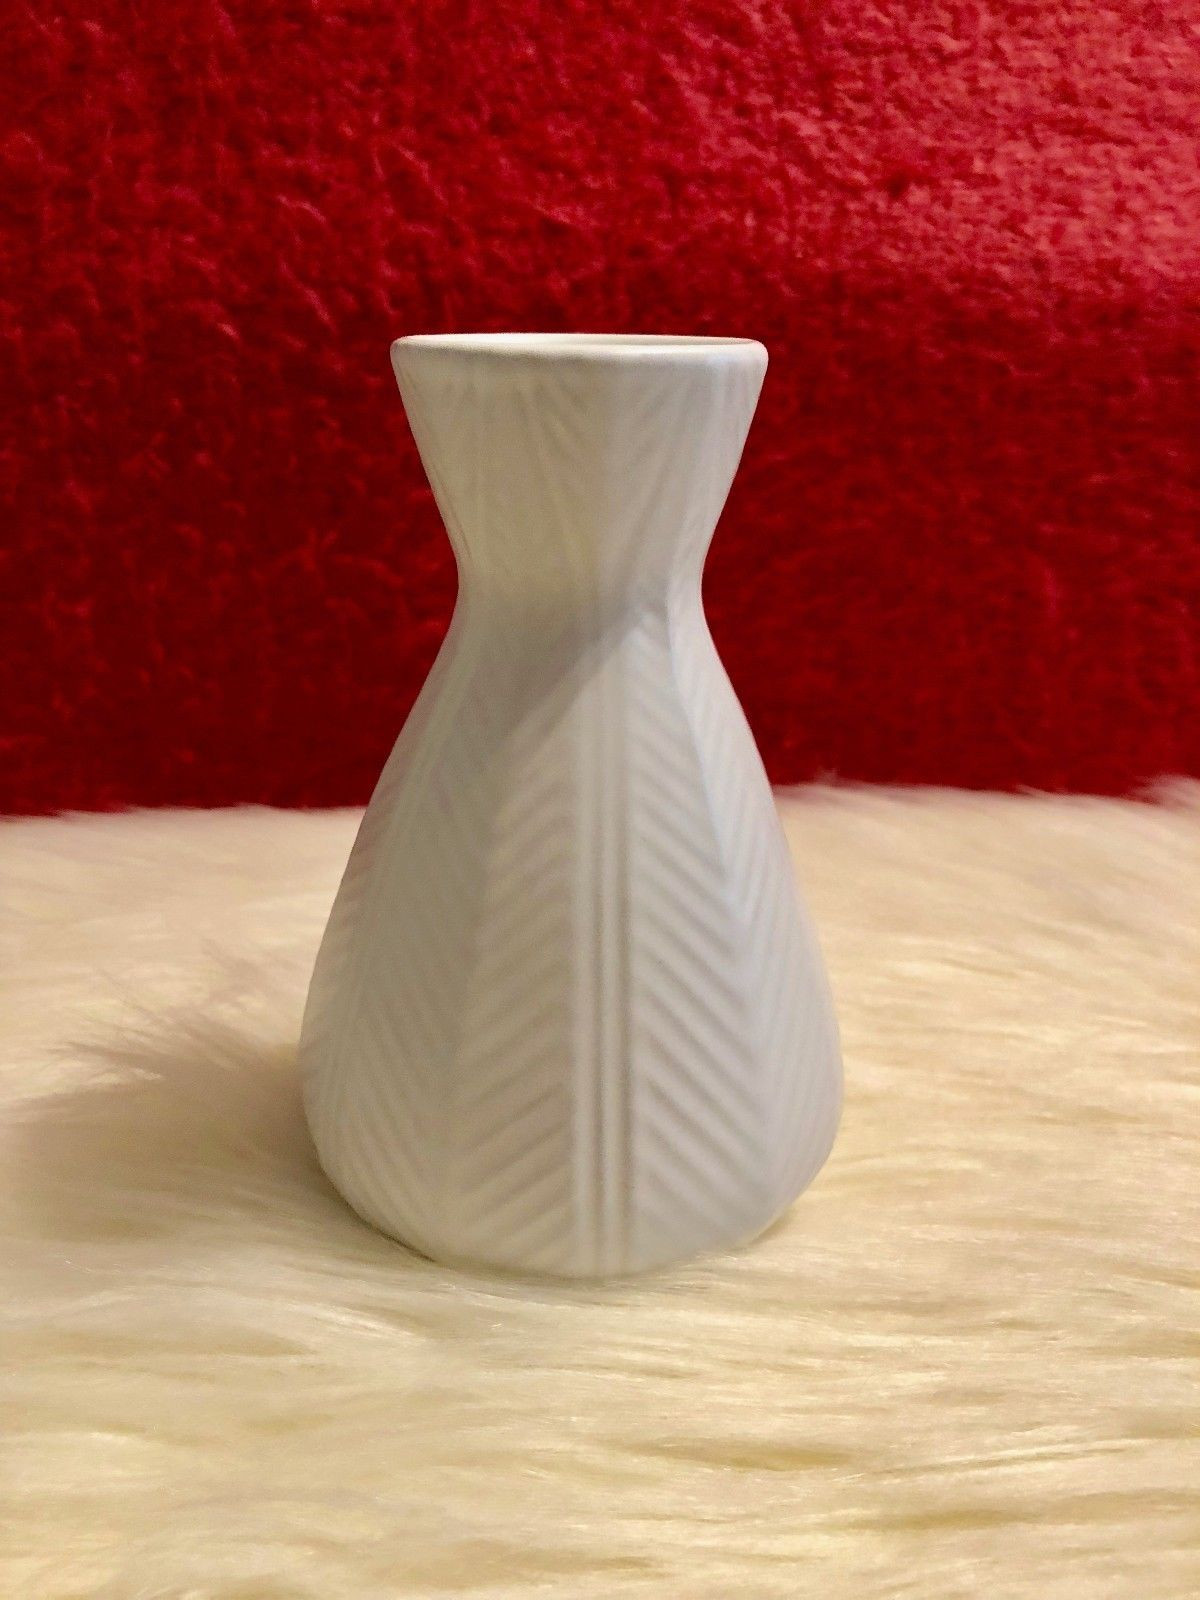 15 Stylish Jonathan Adler Lips Vase 2022 free download jonathan adler lips vase of jonathan adler bud vase rare 59 00 picclick within jonathan adler bud vase rare 1 of 3only 1 available